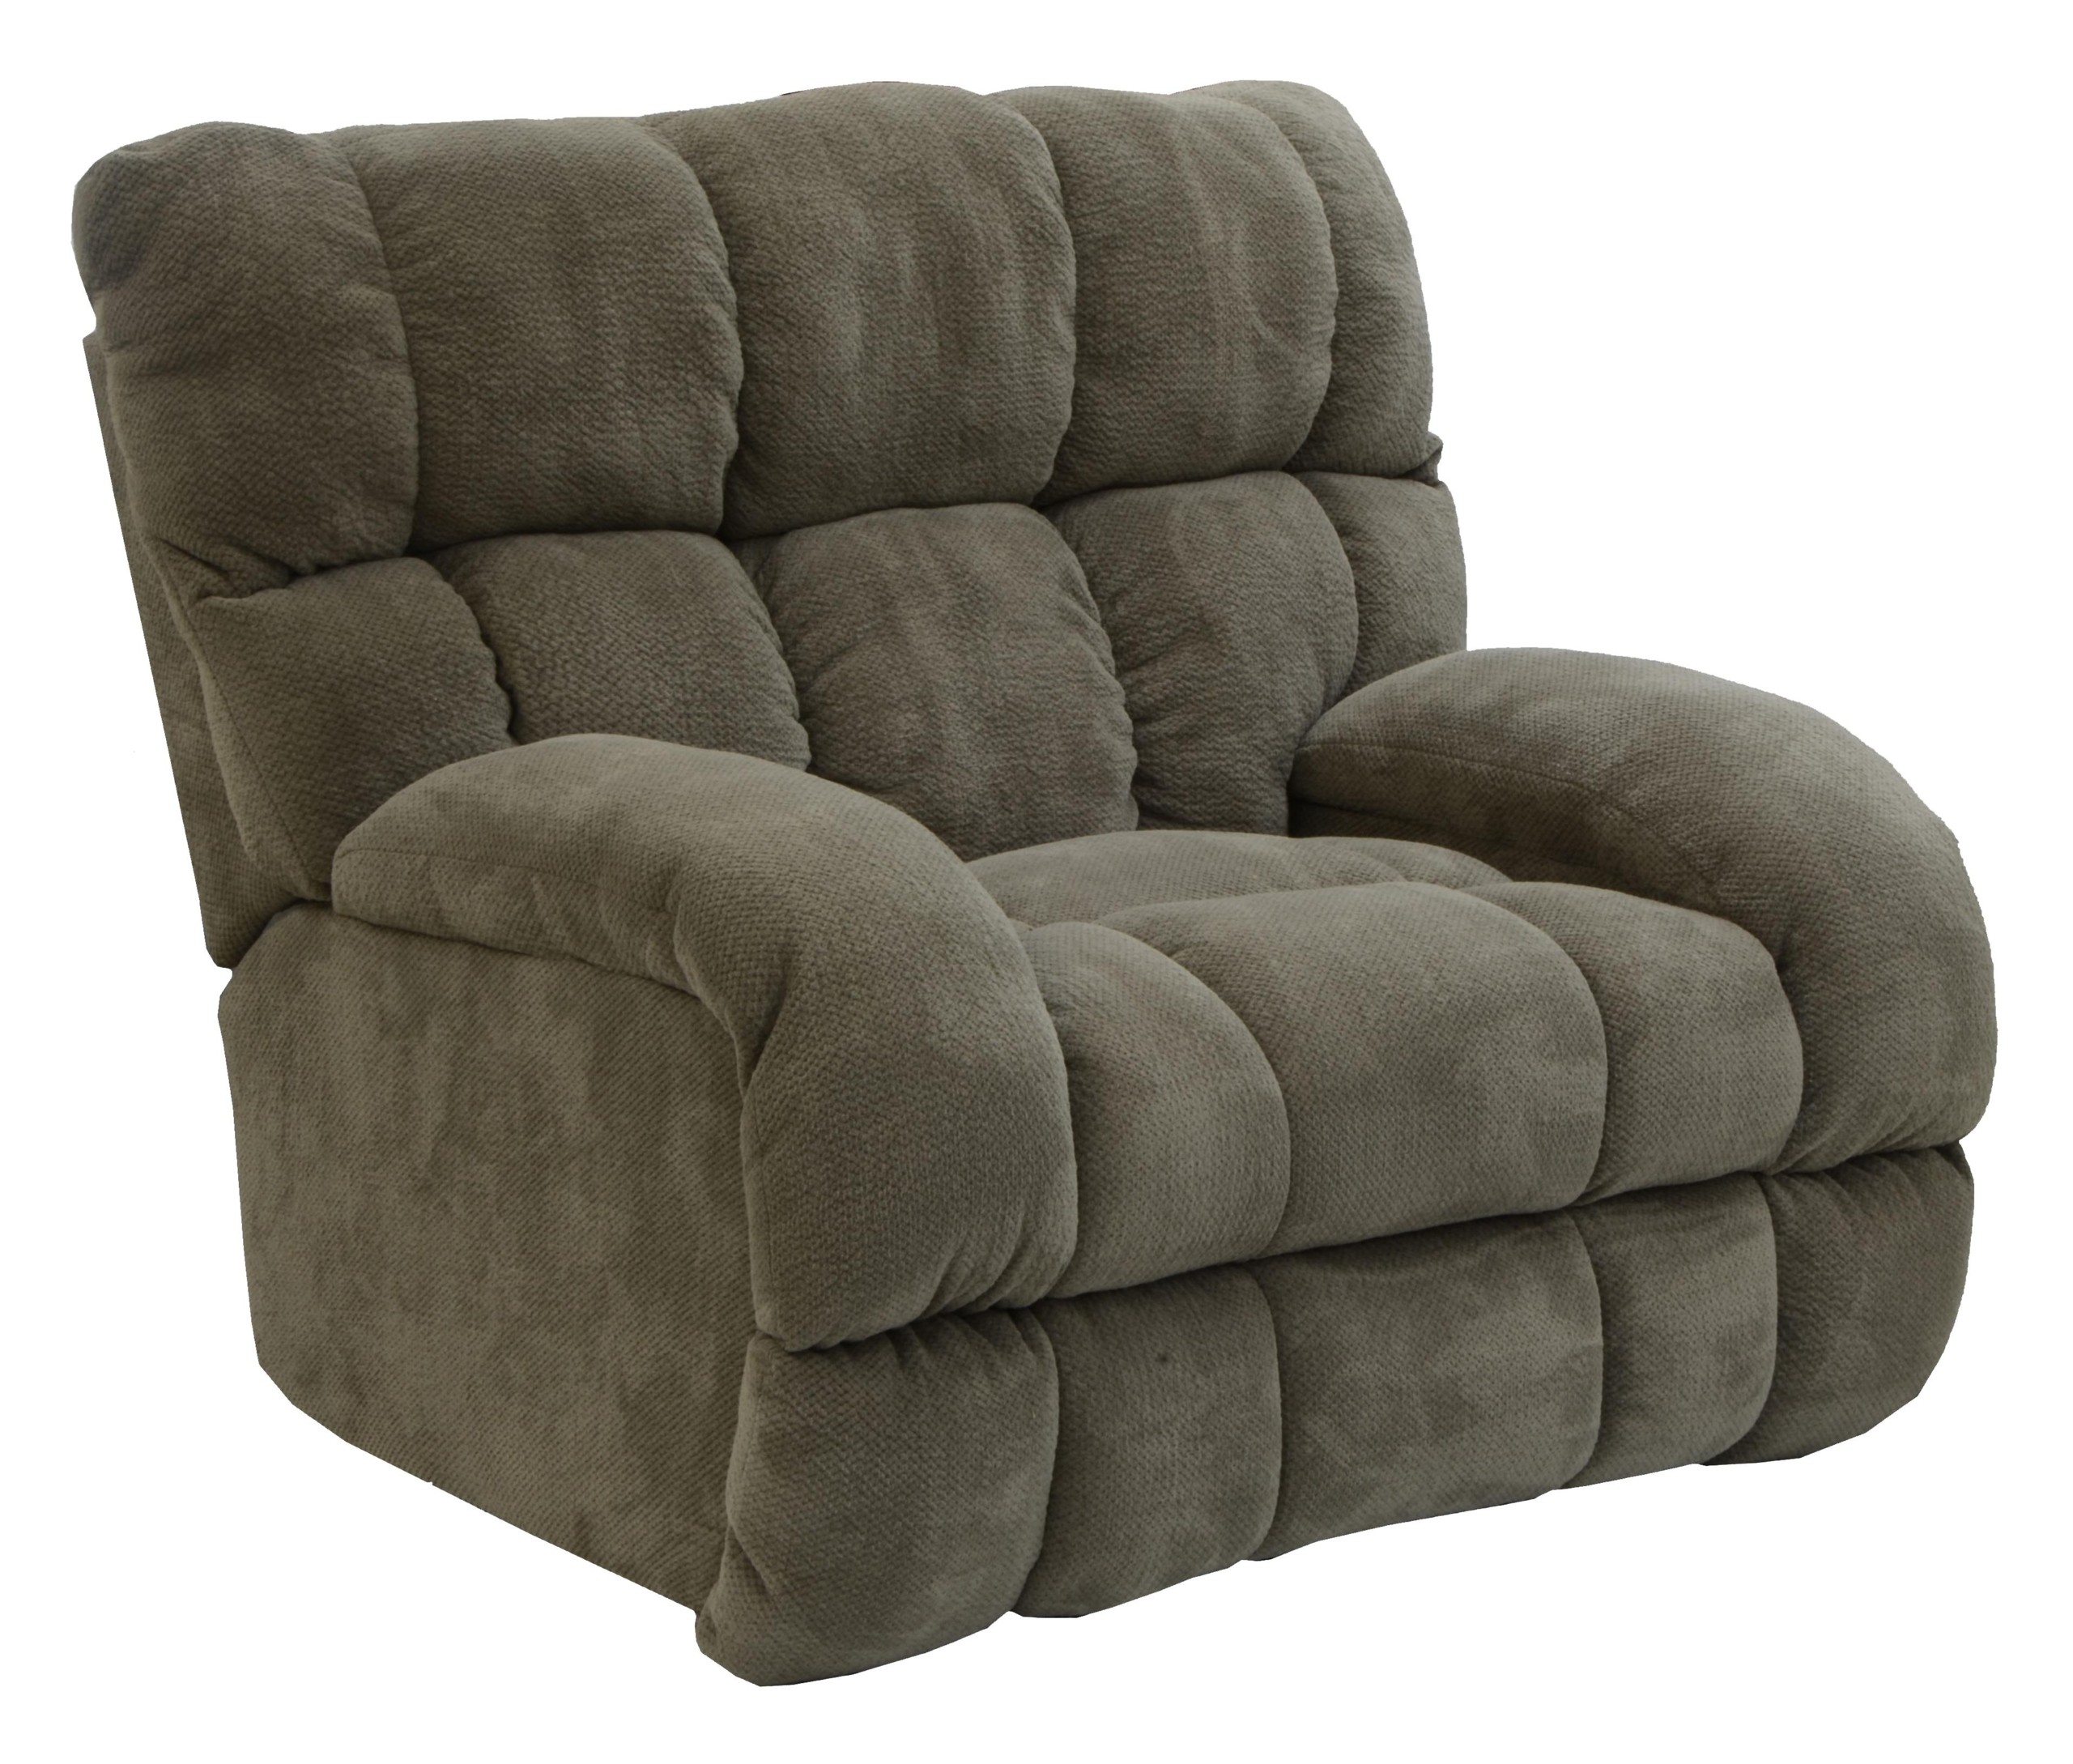 Siesta lay flat recliner with extra wide seat 3